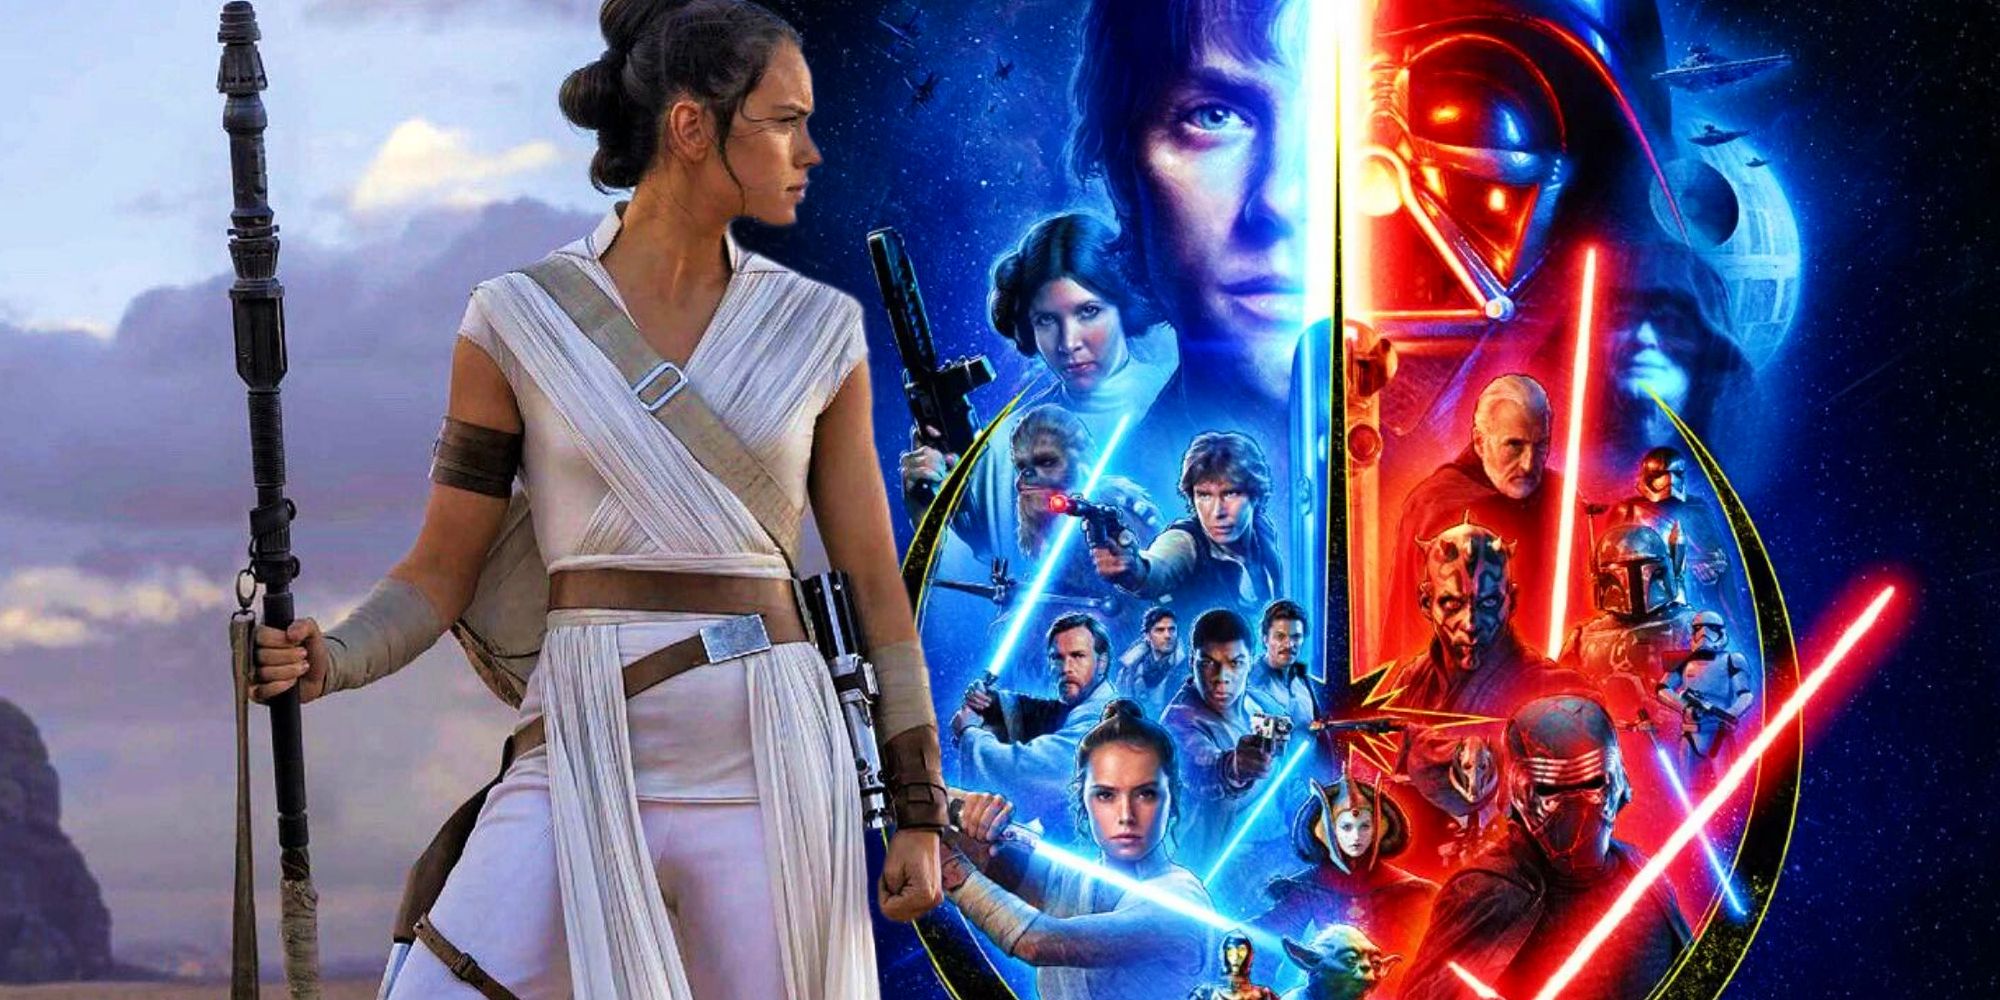 Rey holding her staff in Rise of Skywalker next to an image for the Skywalker Saga